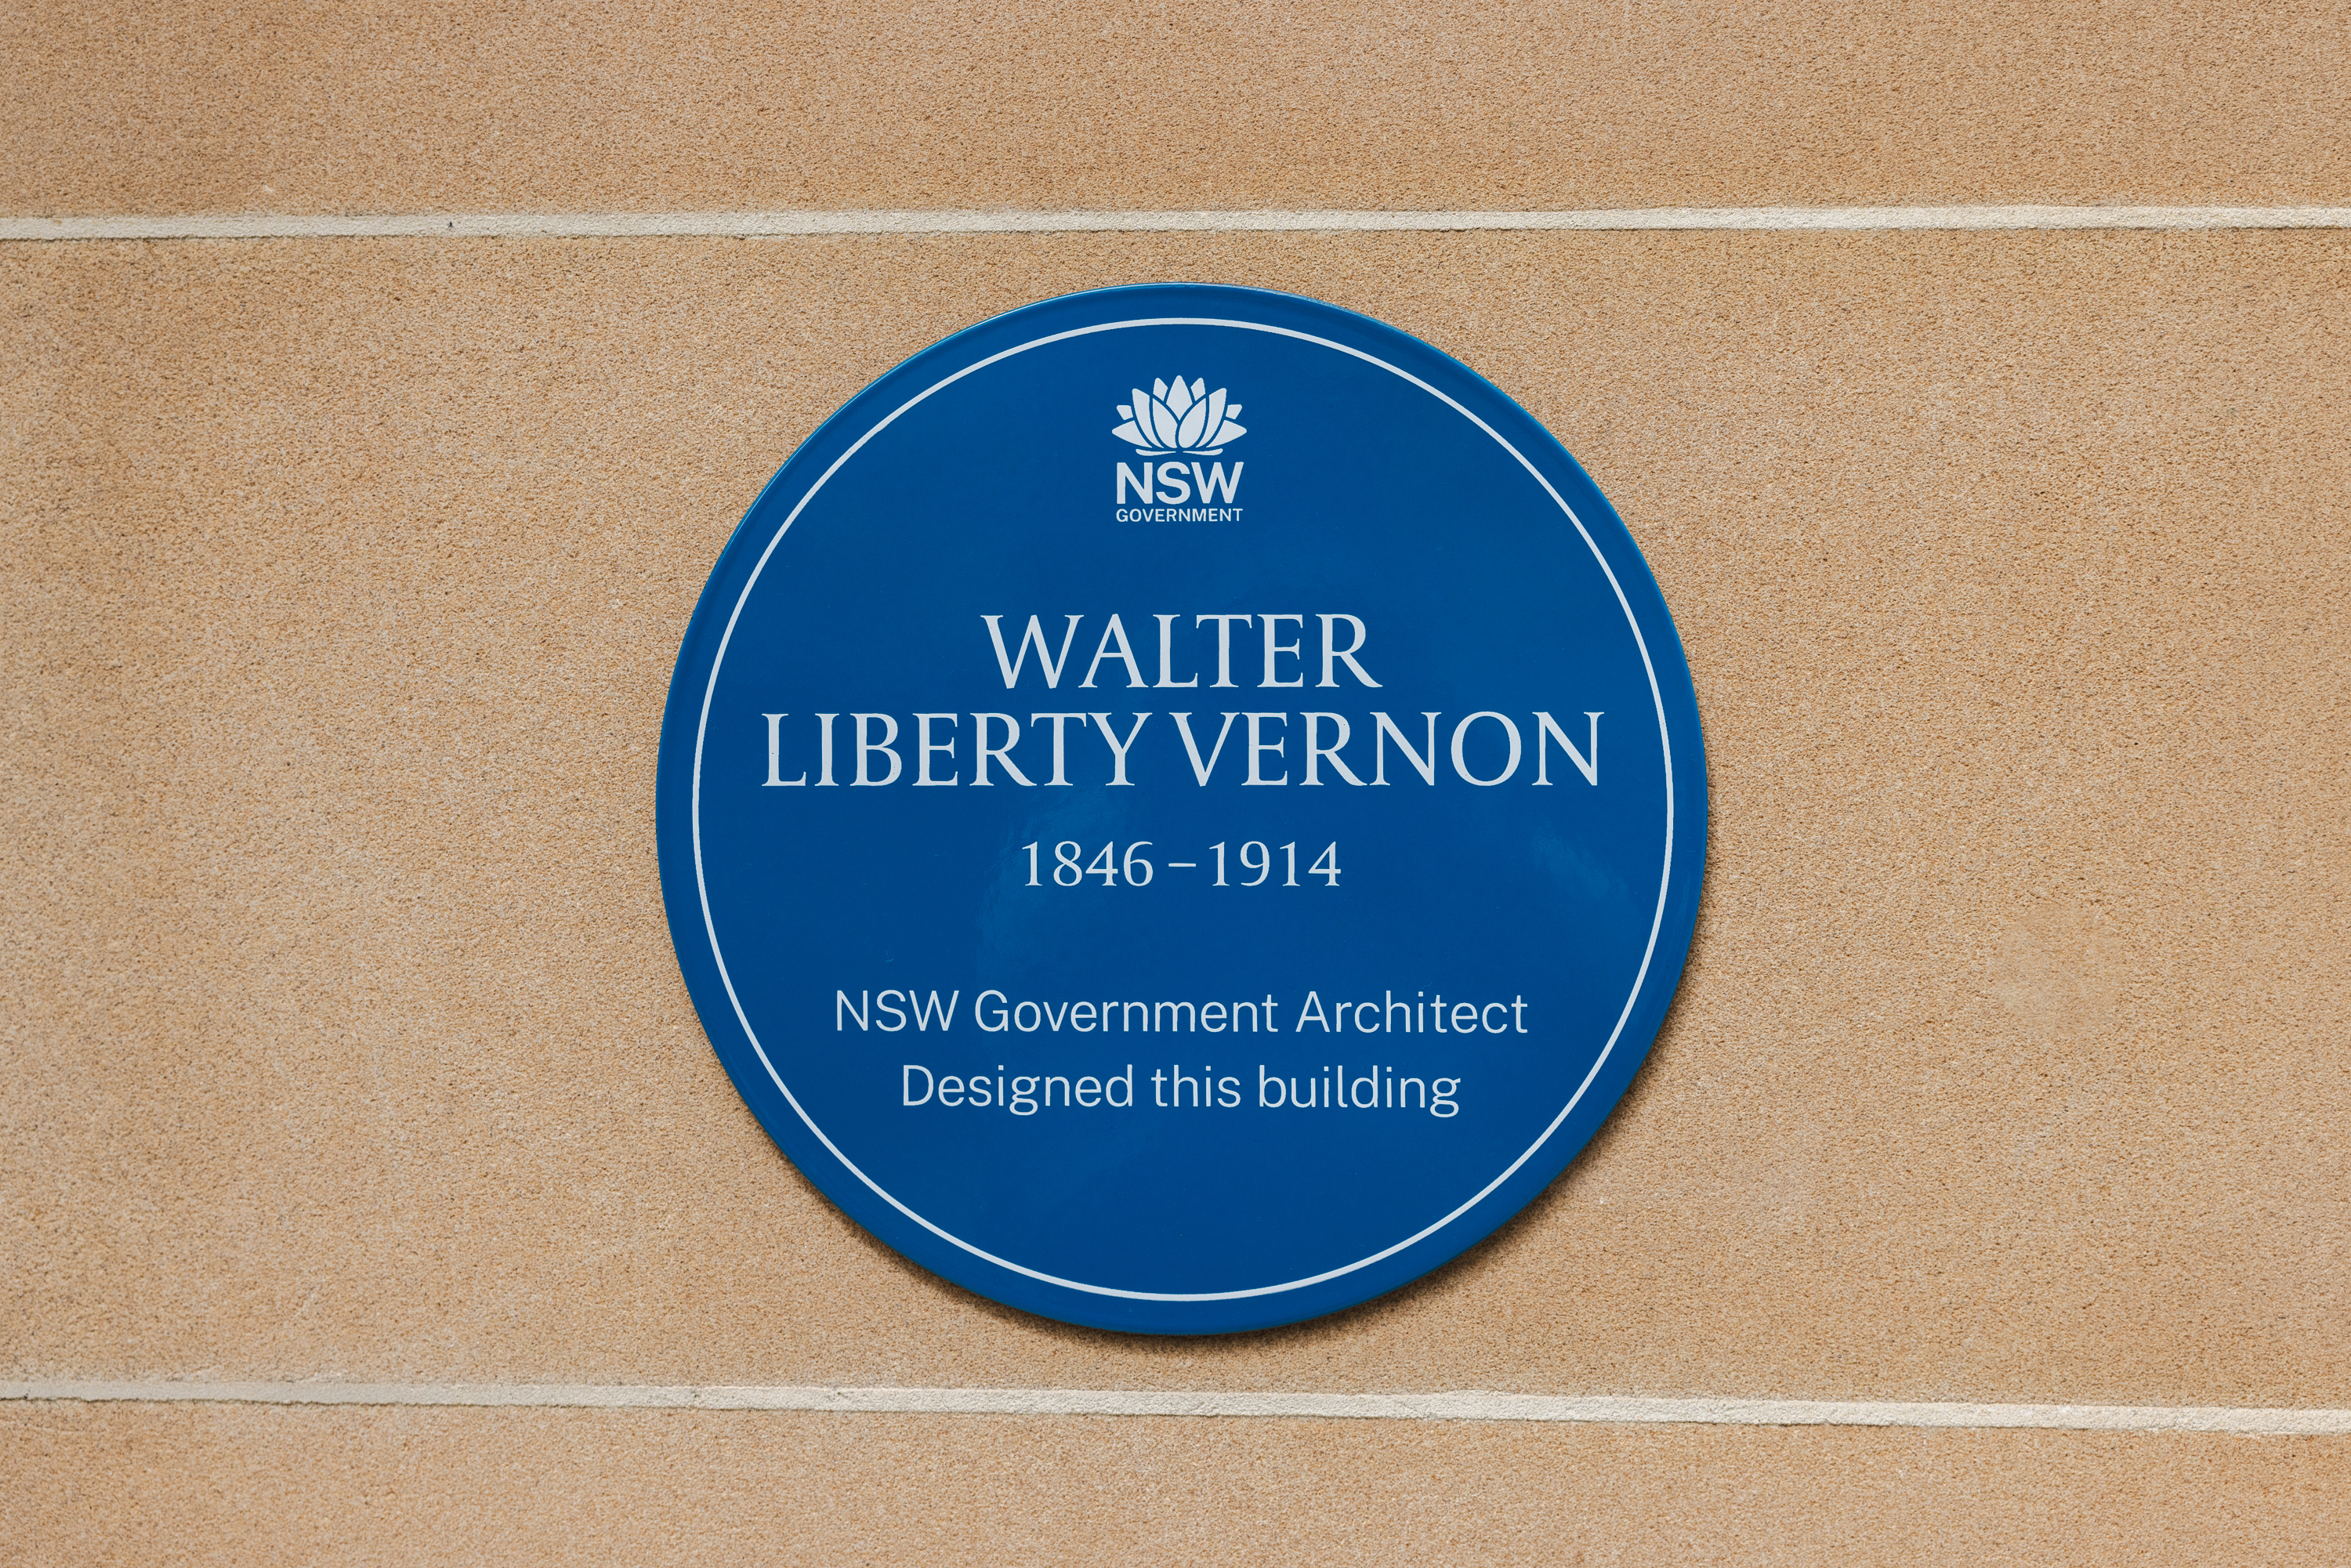 Image 6 of 7 - A blue plaque for Walter Liberty Vernon